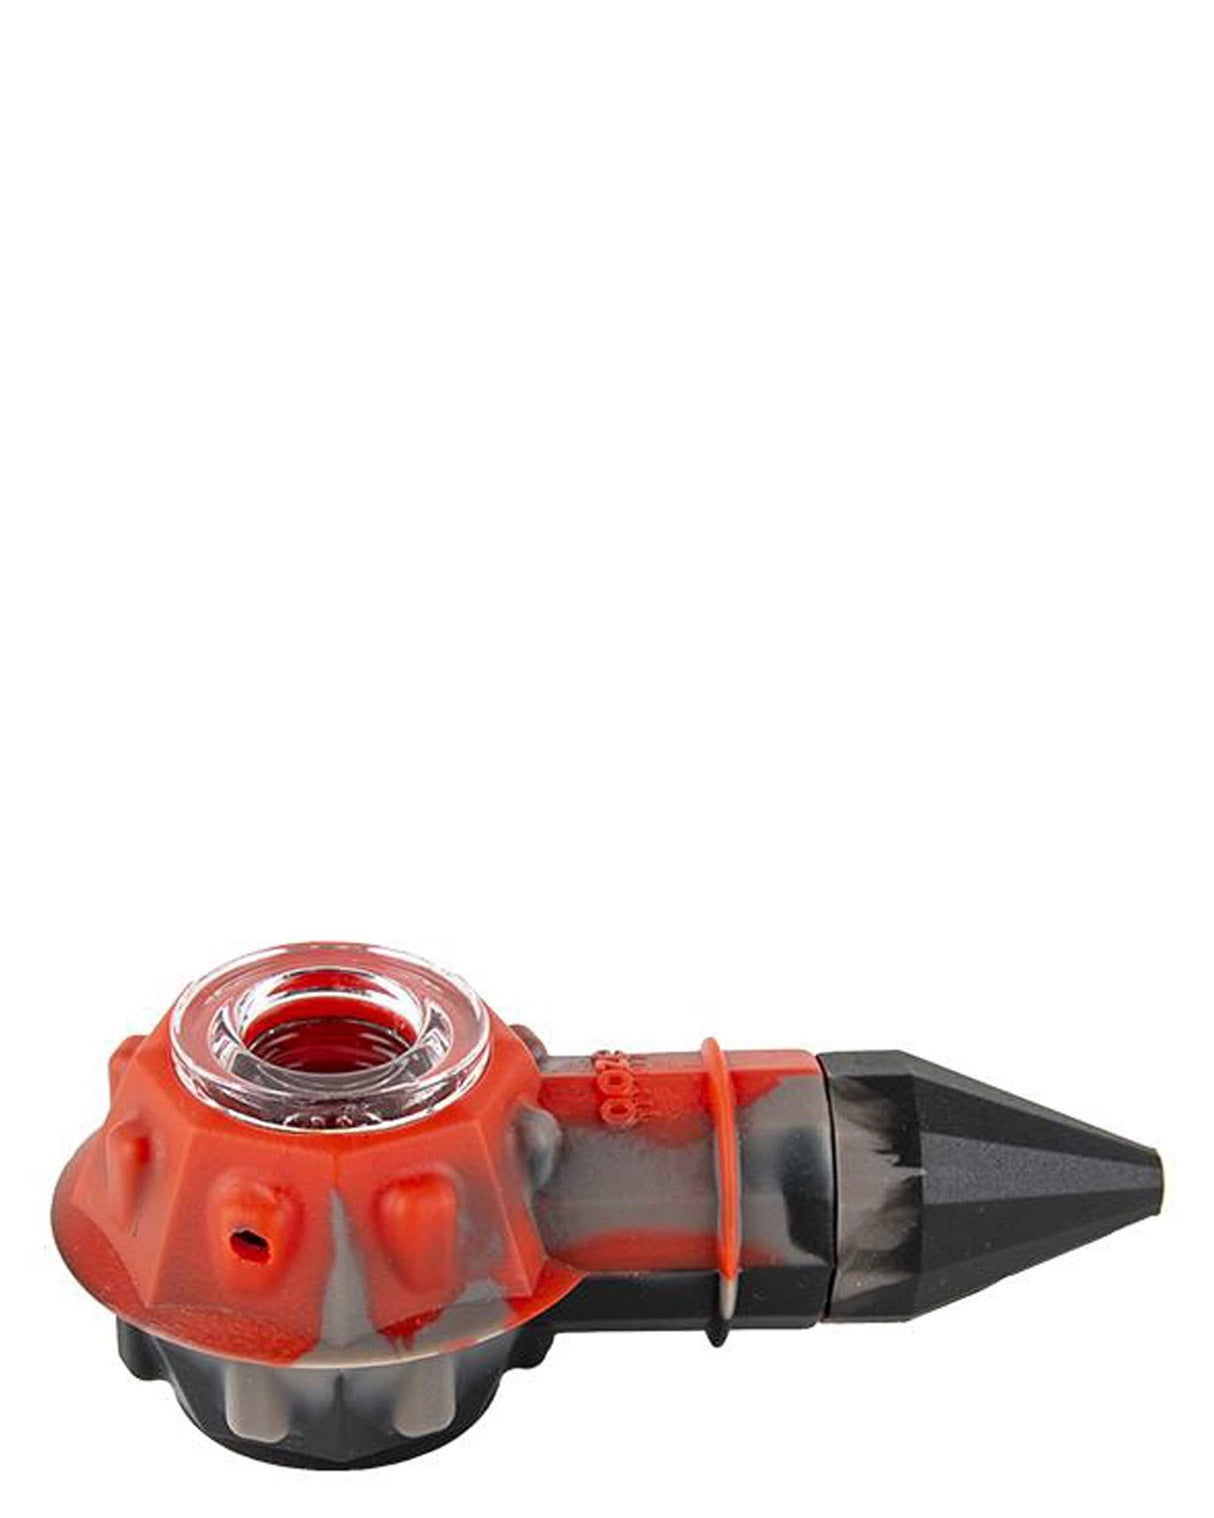 Ooze Bowser Silicone Pipe in red, angled side view, with quartz bowl for dry herbs